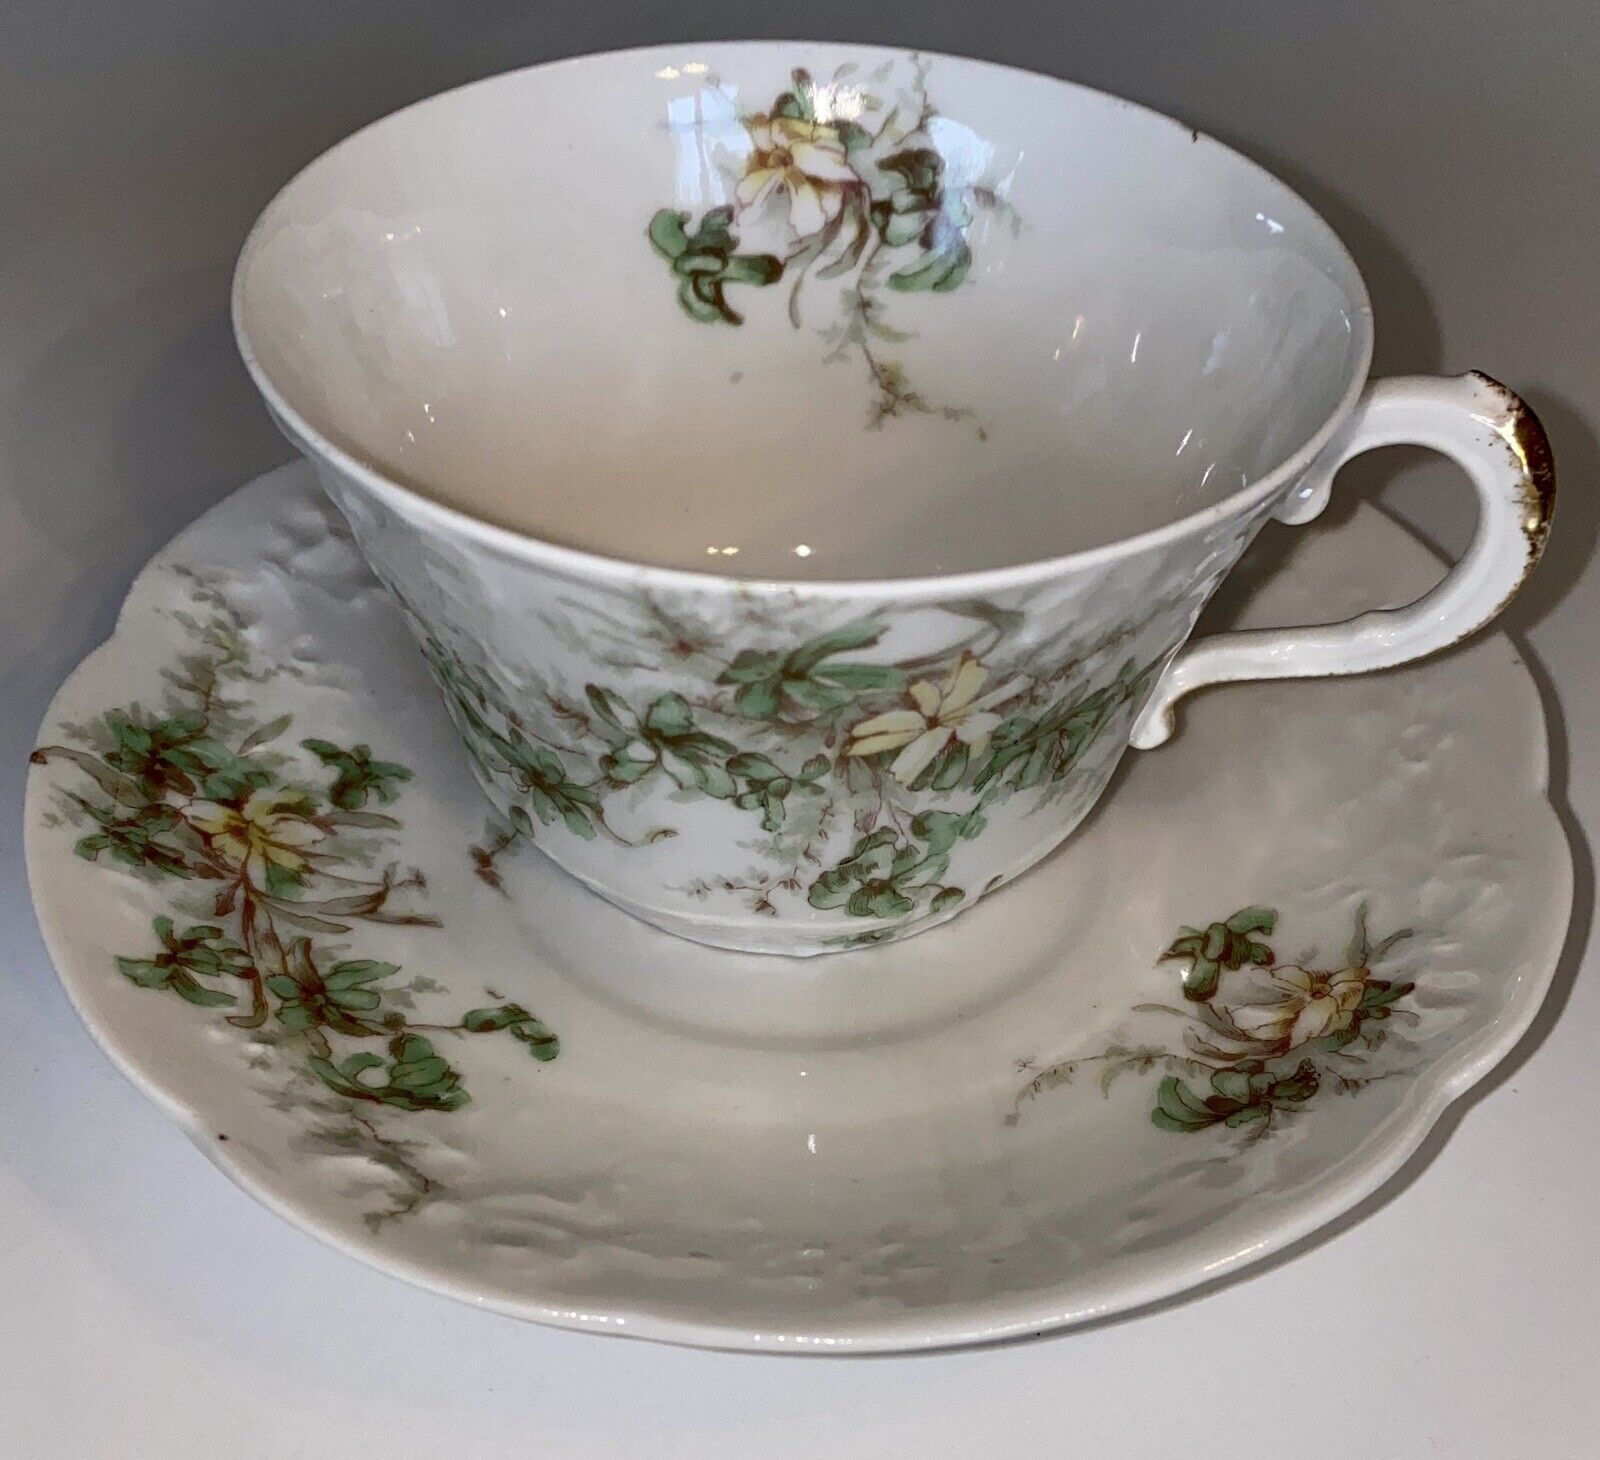 Limoges Society Alluaud Floral Lilly Teacup & Saucer - 1805-1814 ANTIQUE